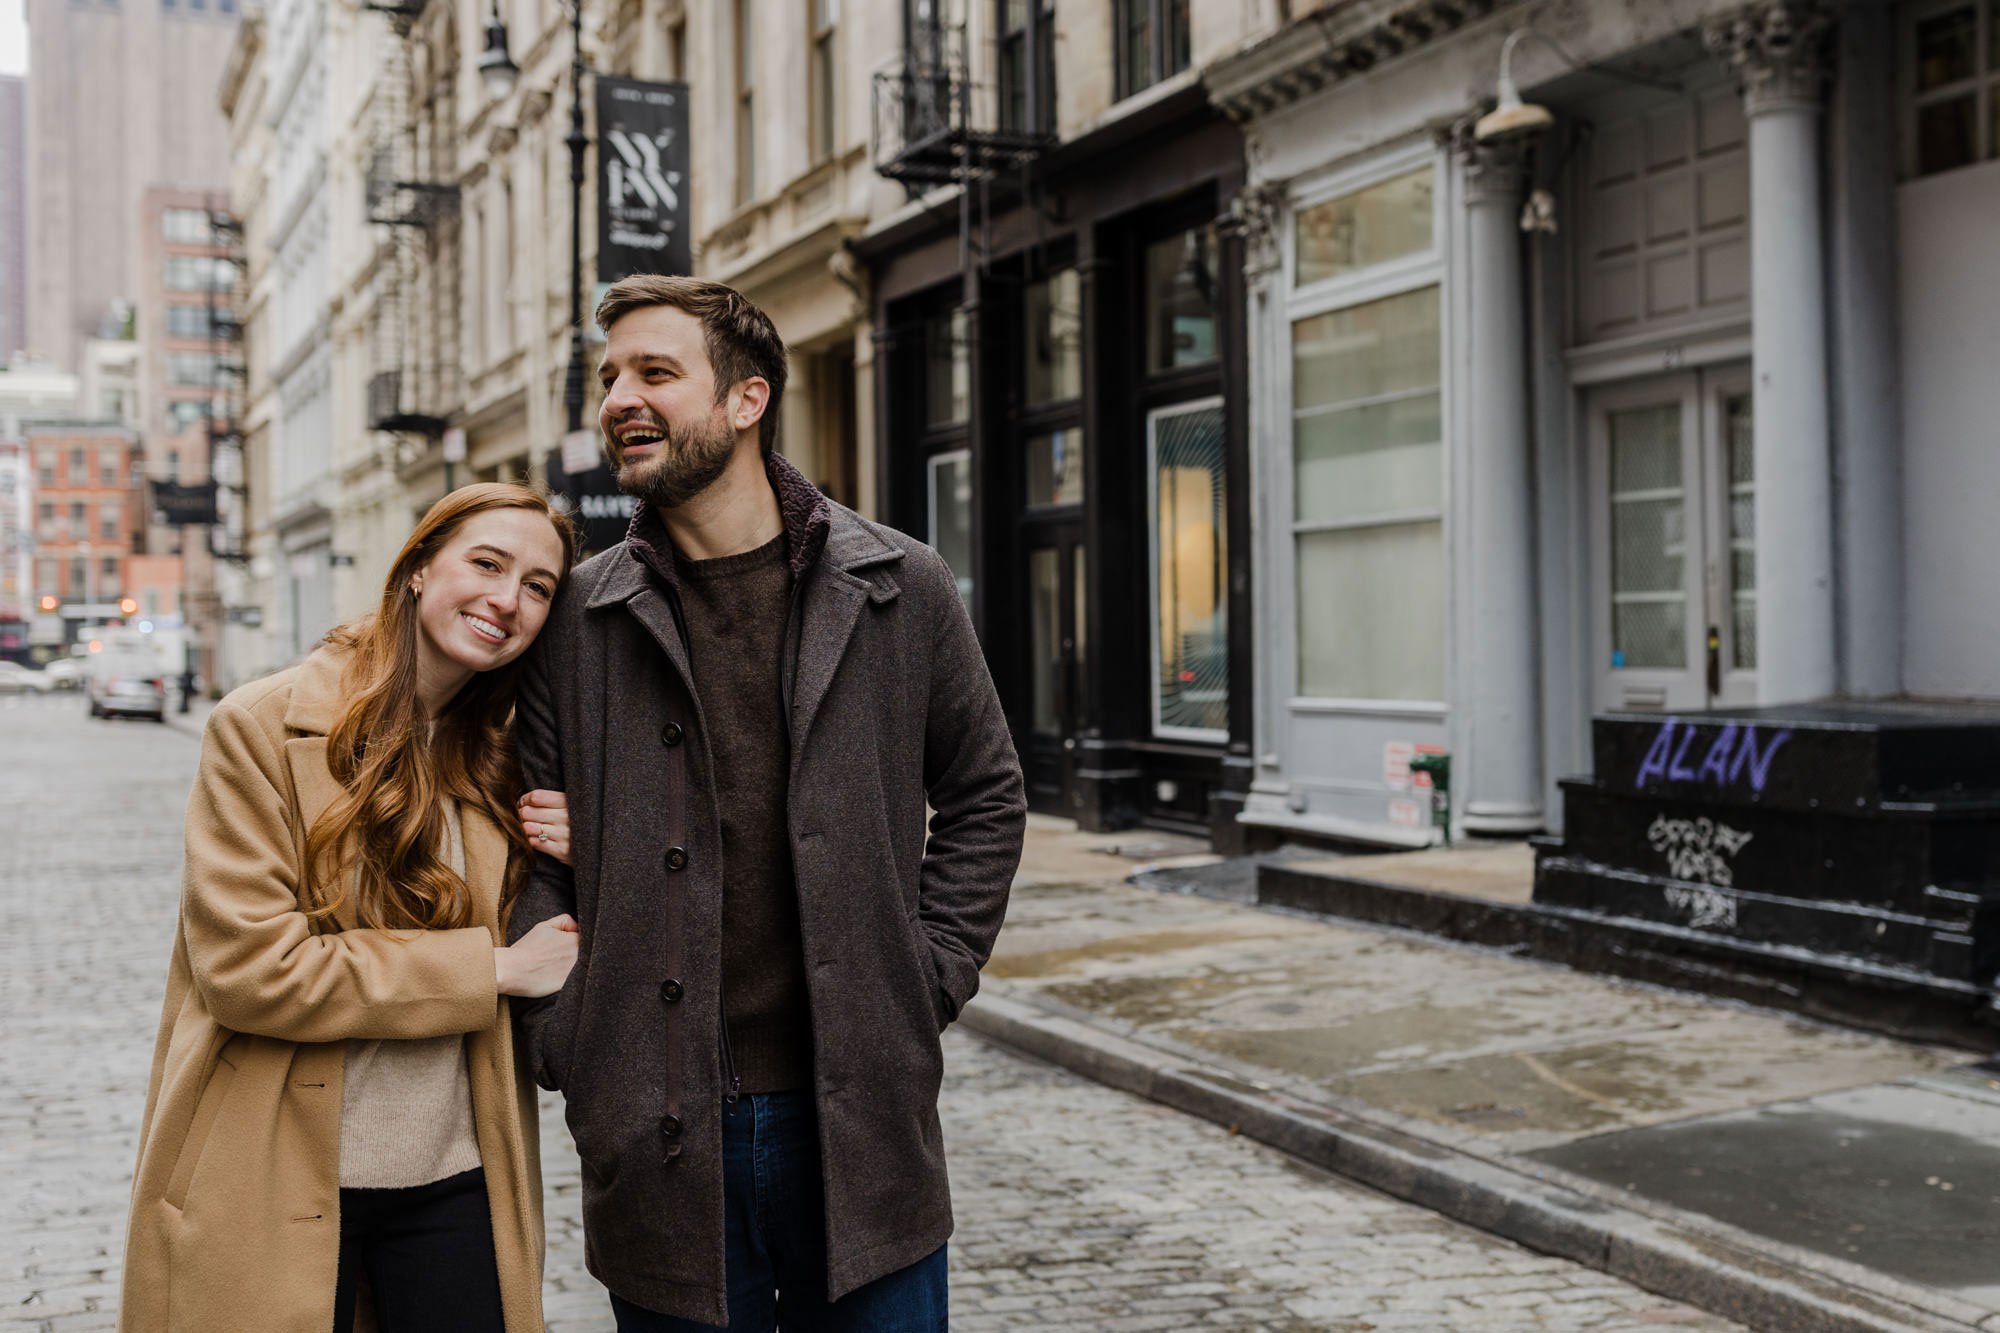 An engaged couple  standing on the street in SOHO in New York City